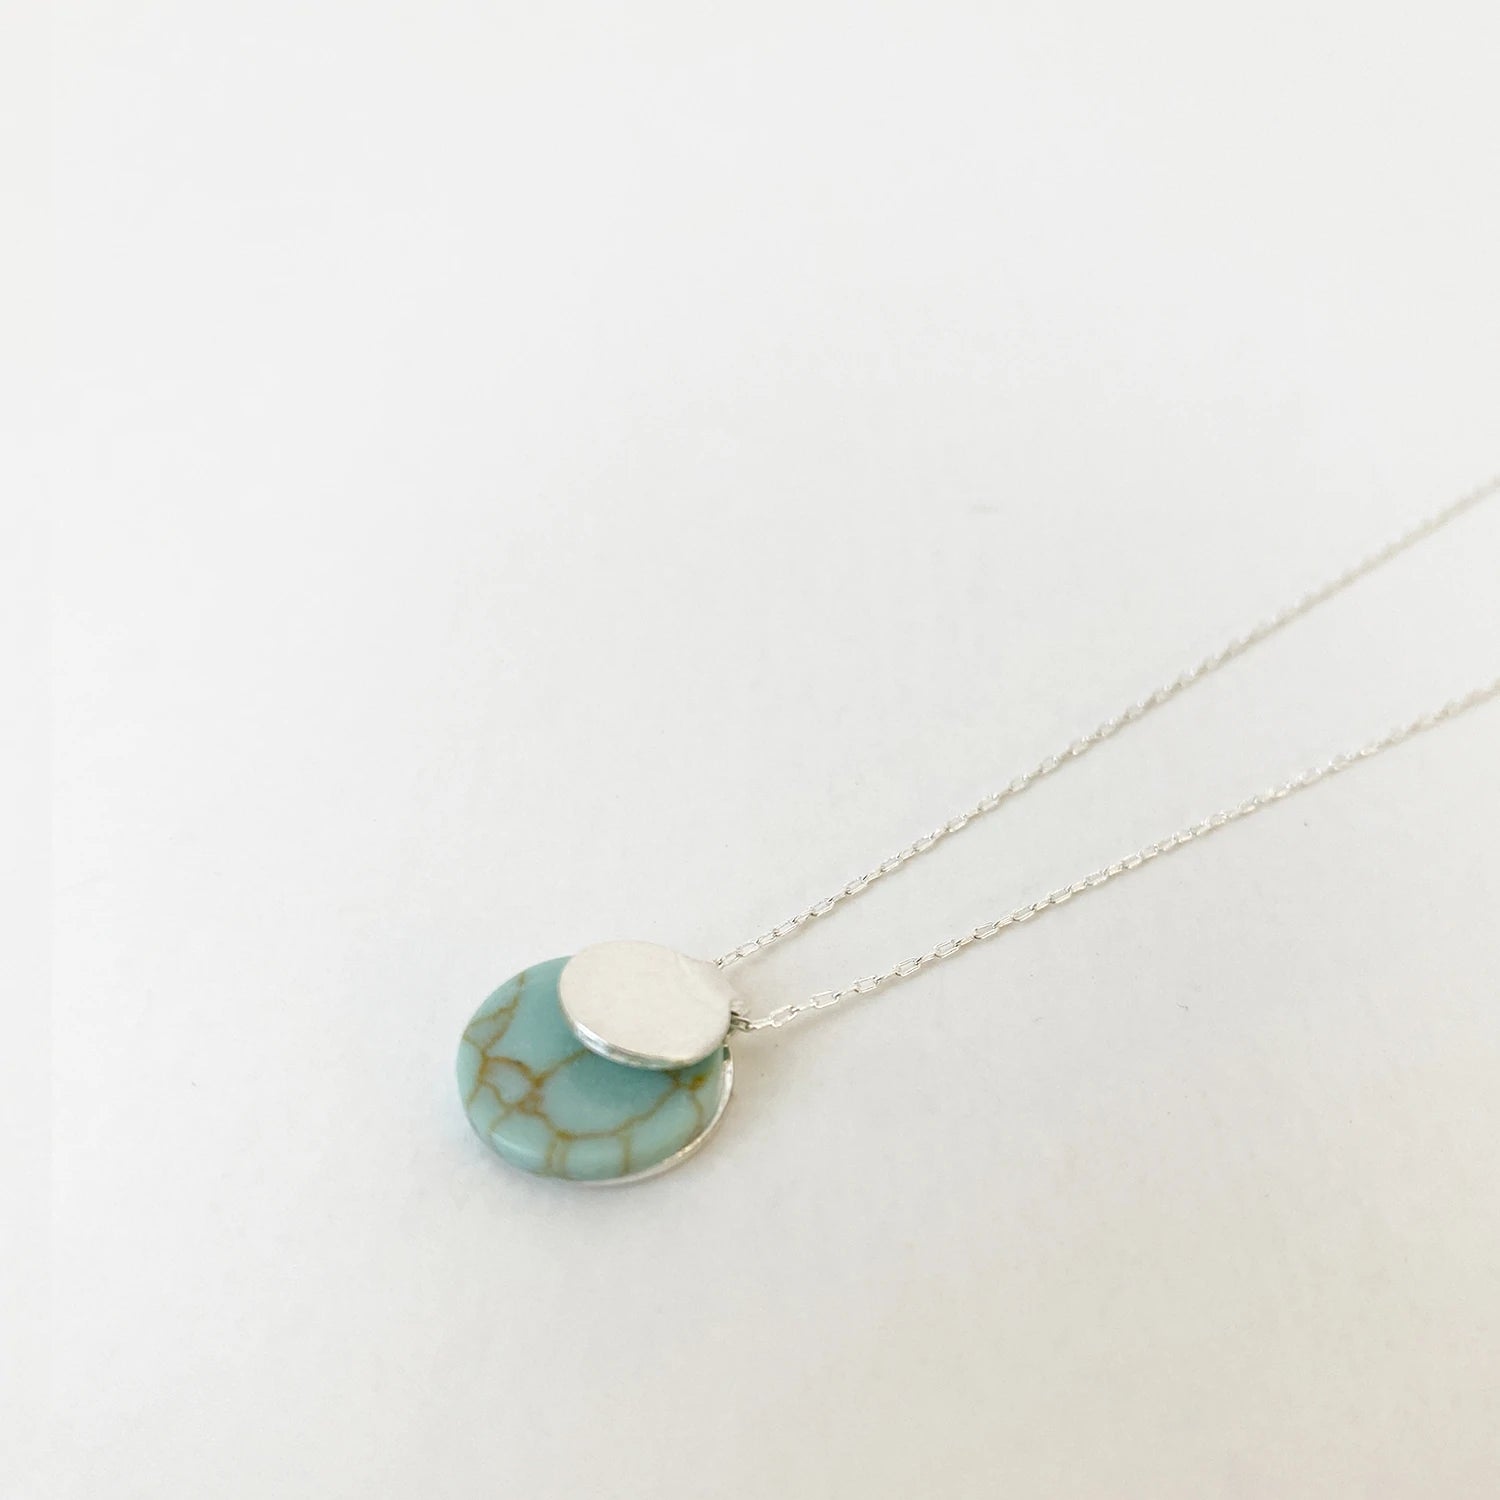 COLLIER "PIERRE RONDE"  TURQUOISE & SILVER